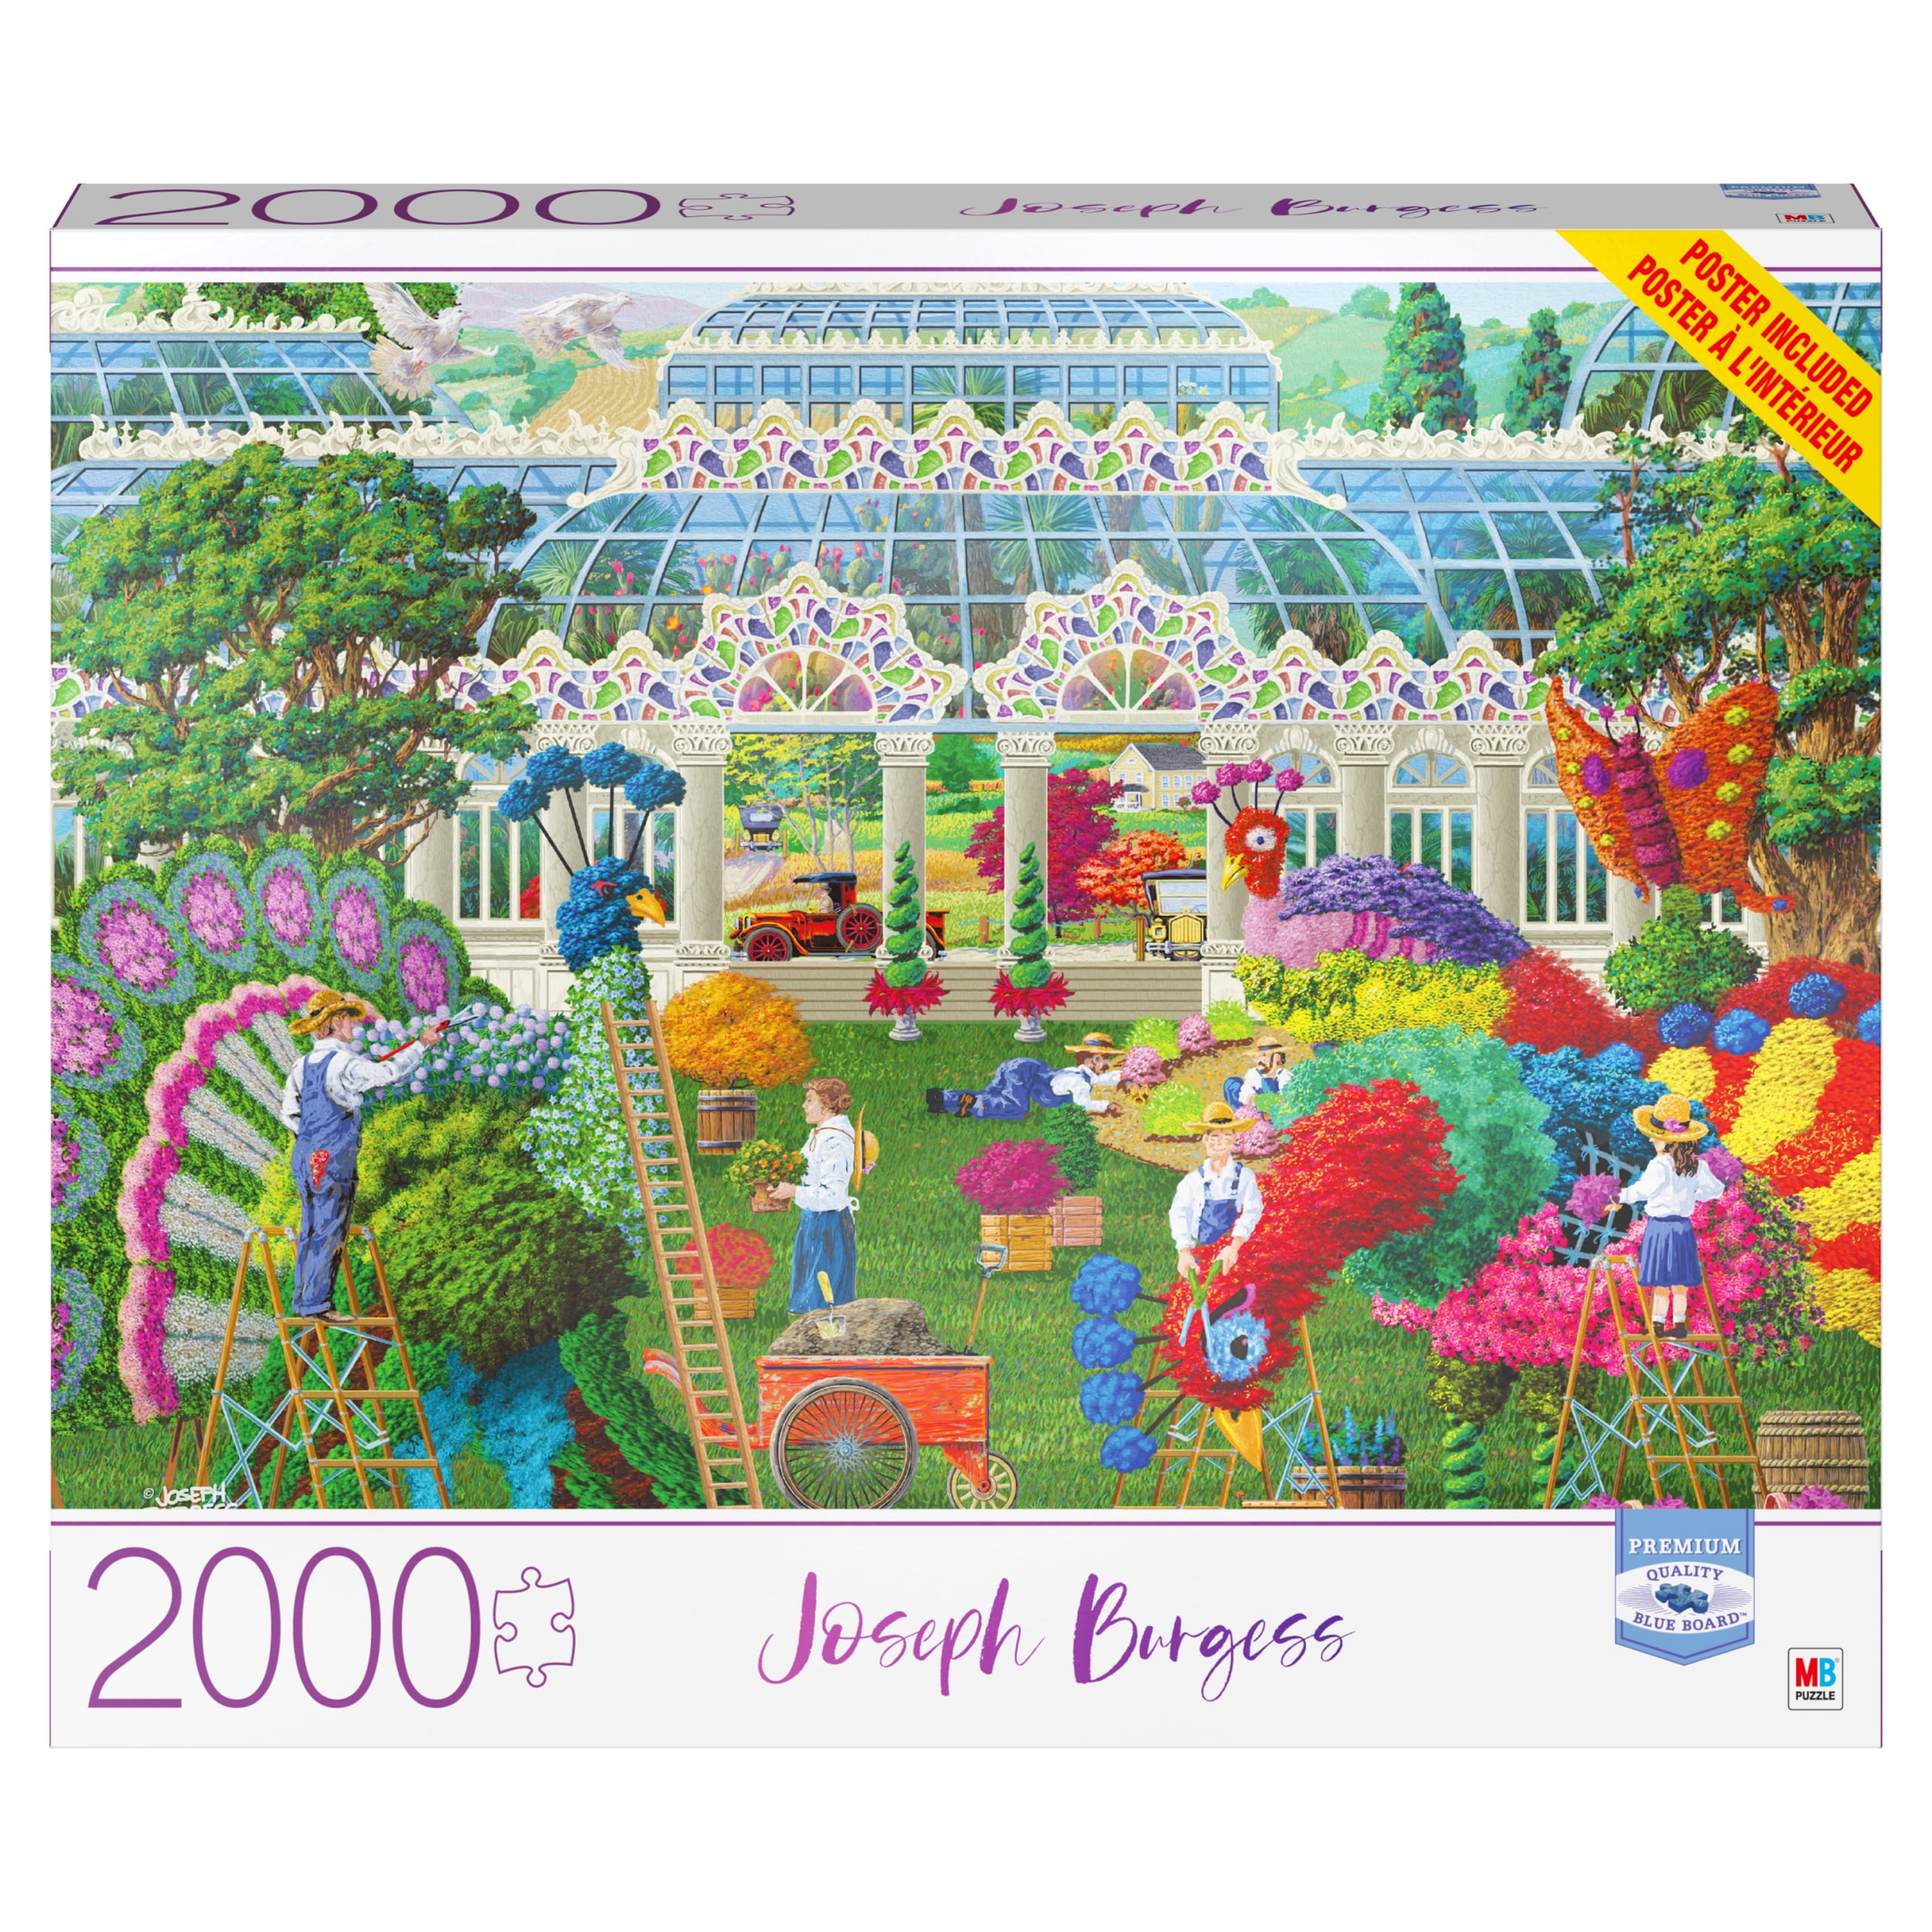 Peacock Jigsaw Puzzles for Adults Jigsaw Puzzle Toys Creative Gifts Fun Family Games 2000 Pieces Premium Jigsaw Puzzles